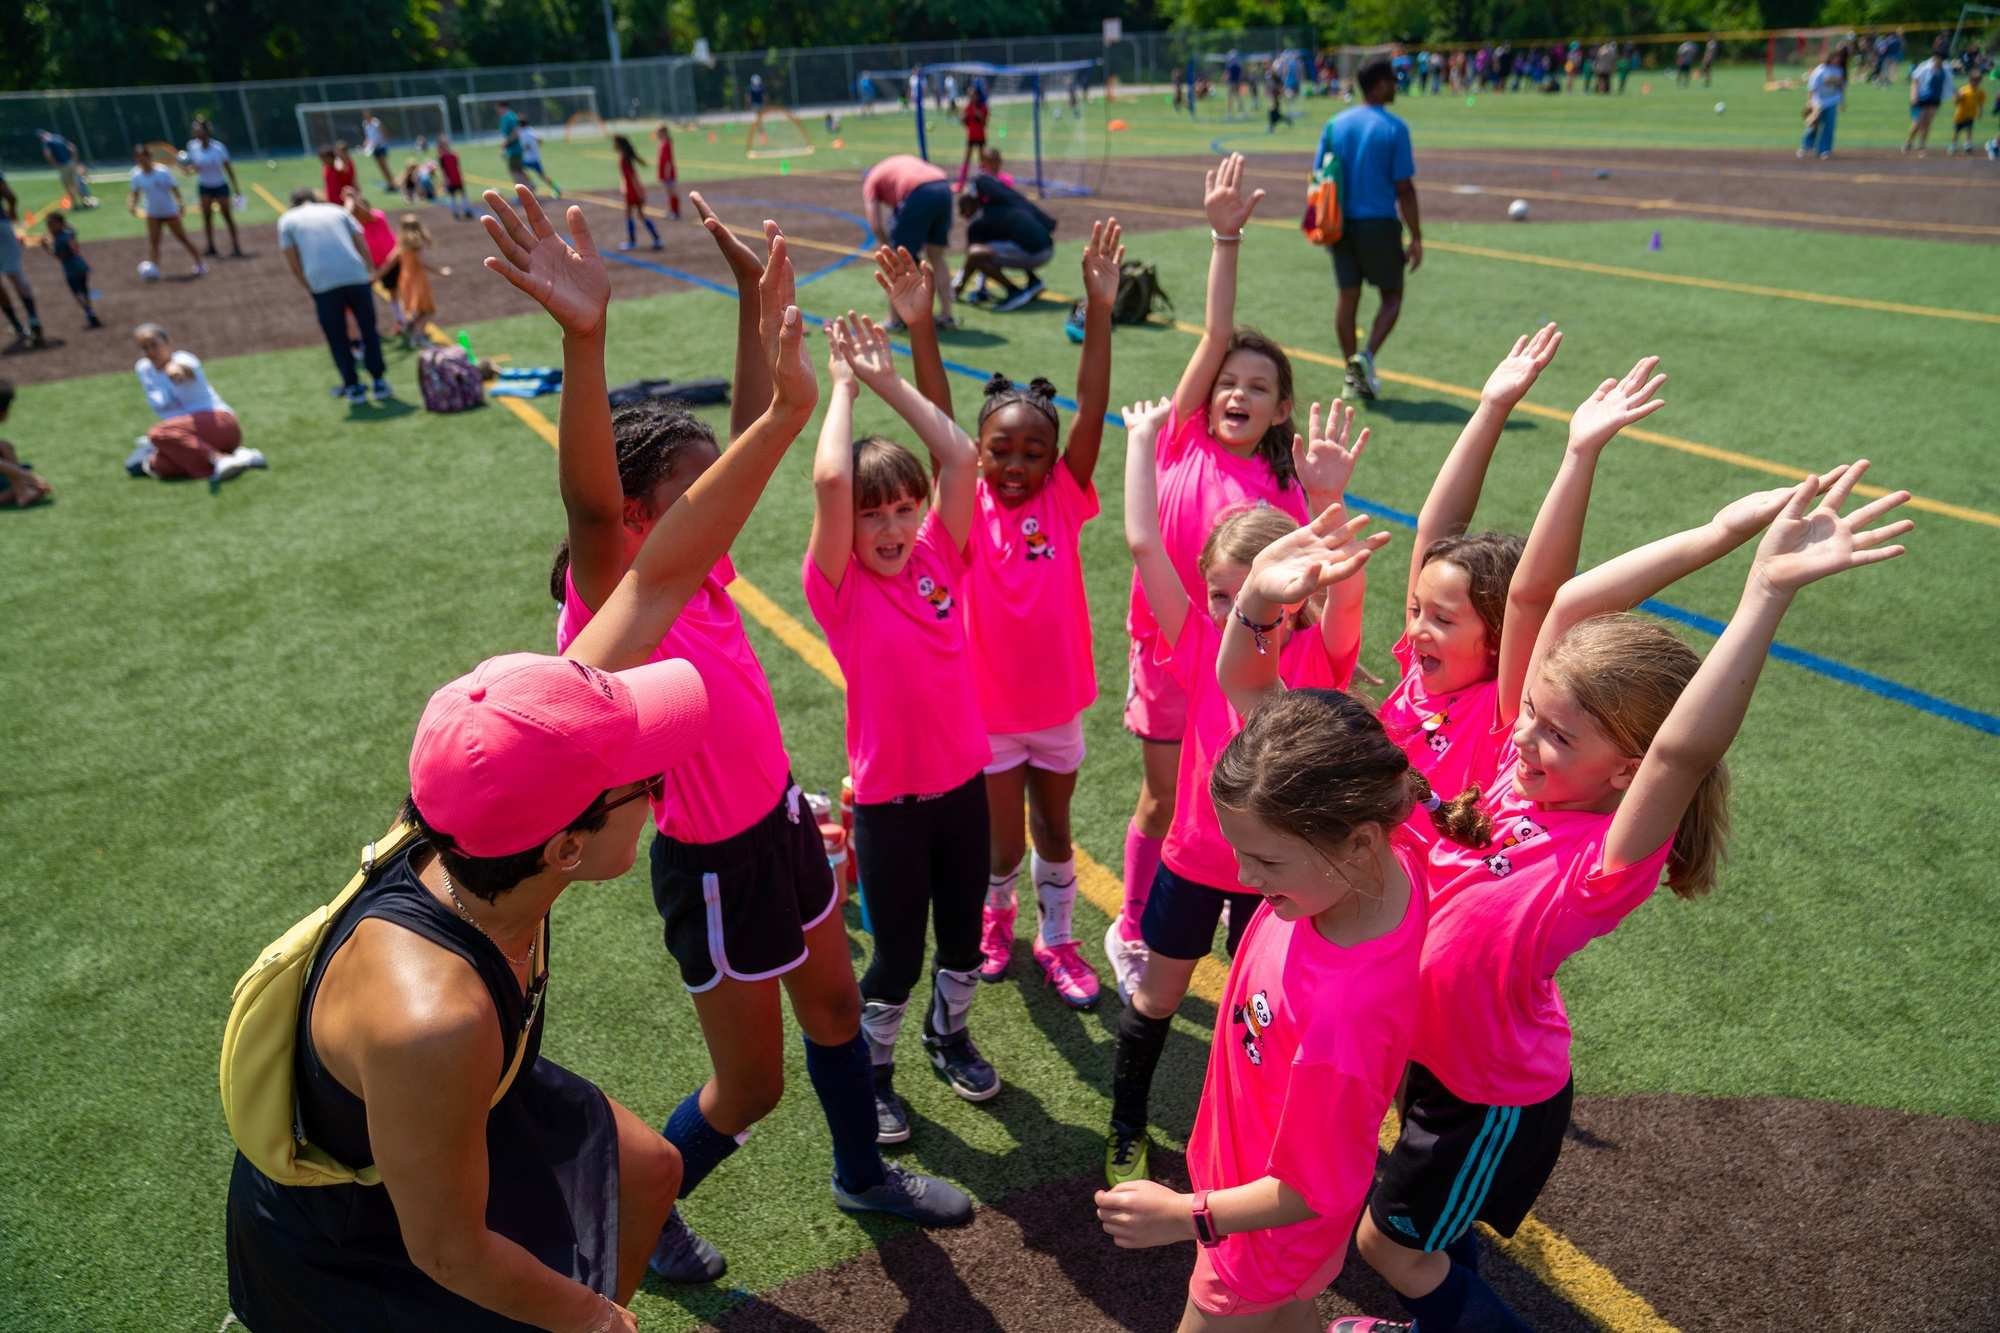 Dc-way-soccer-club-for-kids-in-washington-dc-capitol-hill-league-at-brentwood-hamilton-park-06-03-2023 0103.jpg